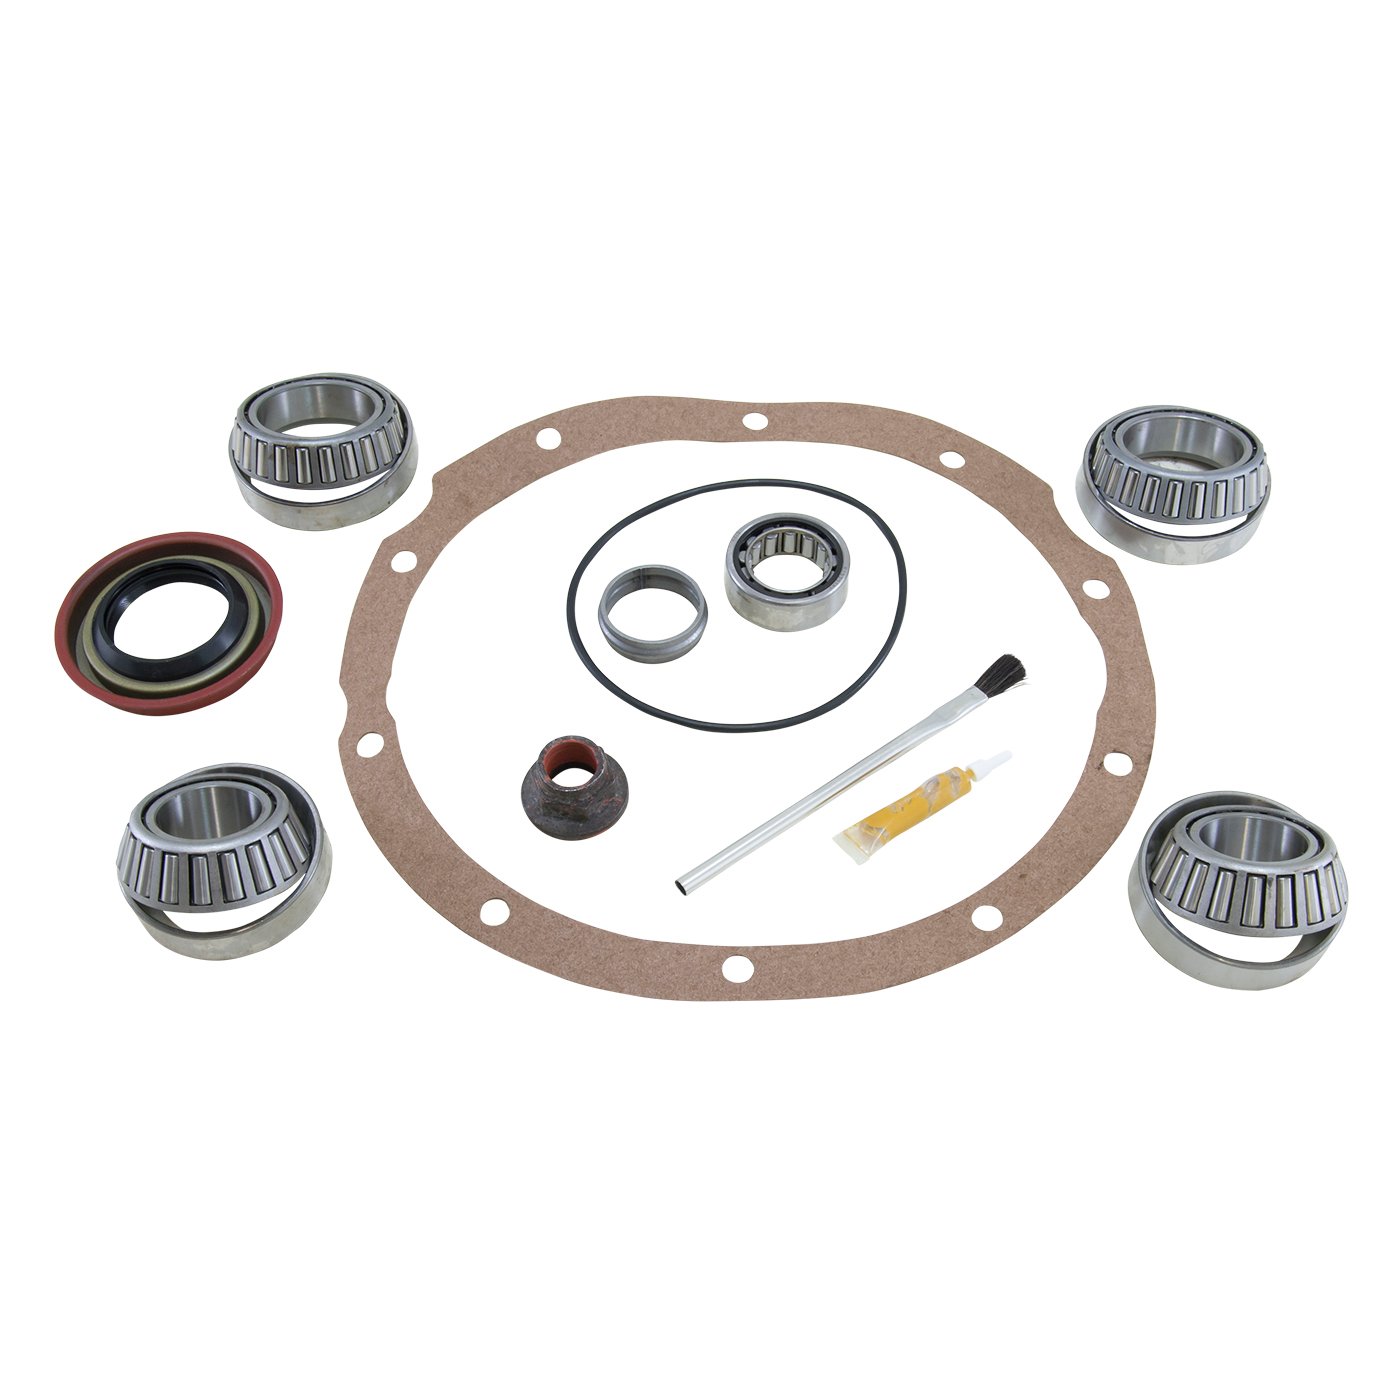 Bearing Install Kit For Ford 9 in. Differential, Lm603011 Bearings